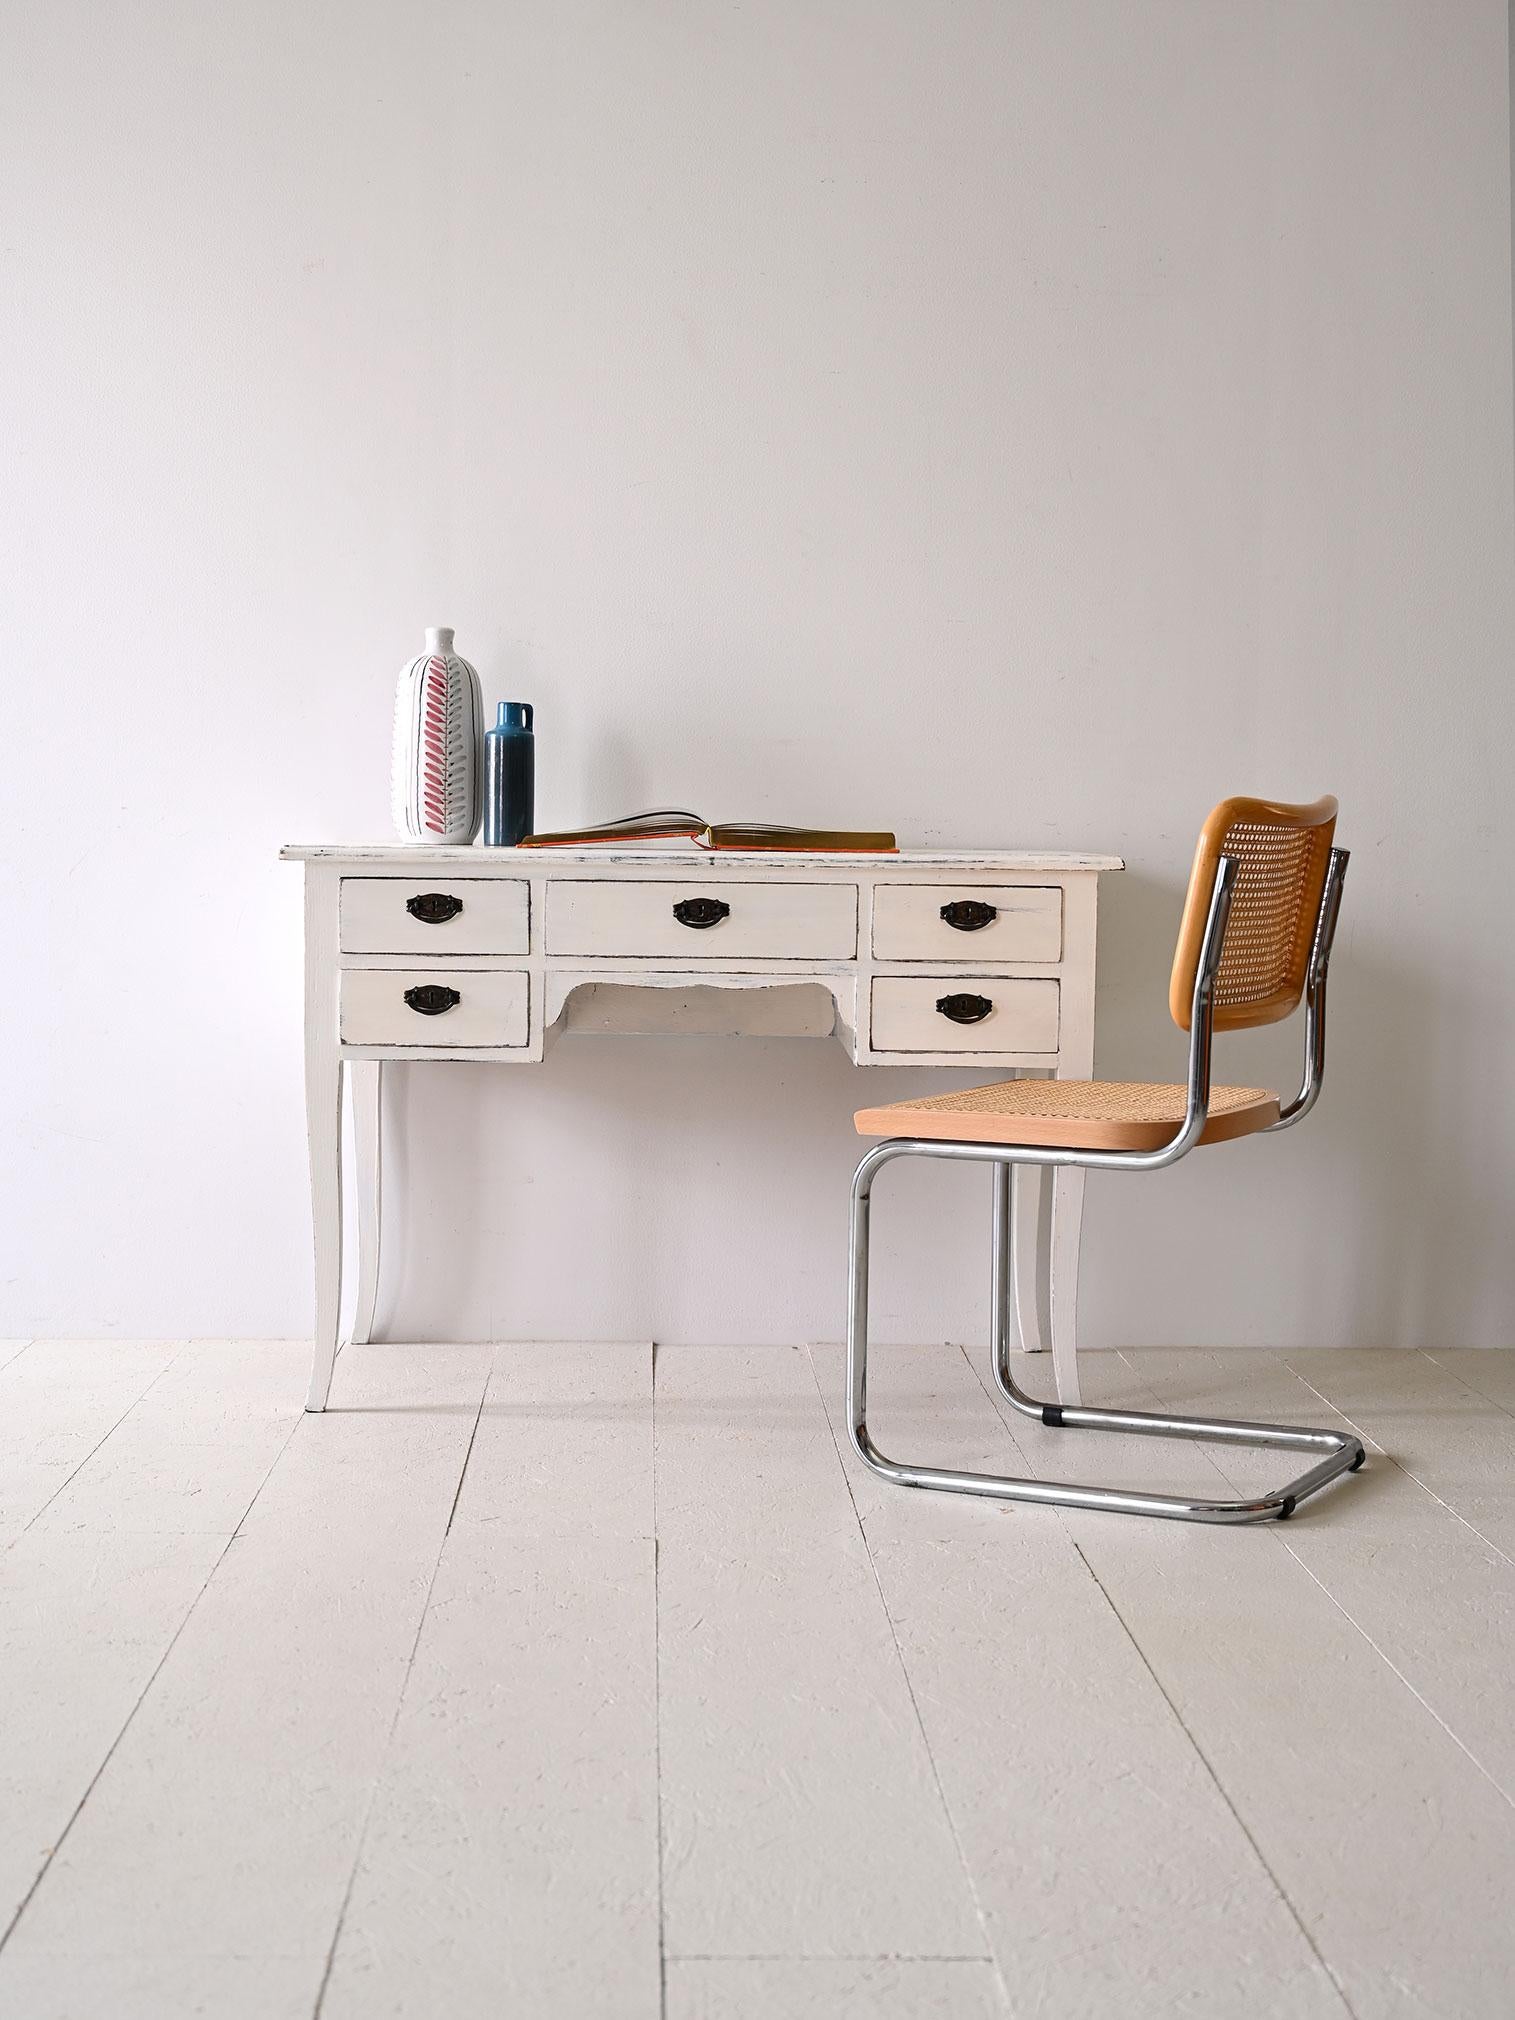 1940s white desk with metal handles.

Art Deco-style white desk with dark-colored metal handles. This original vintage office desk features a large work surface with slightly curved smaller sides that add a touch of elegance. The frame features four